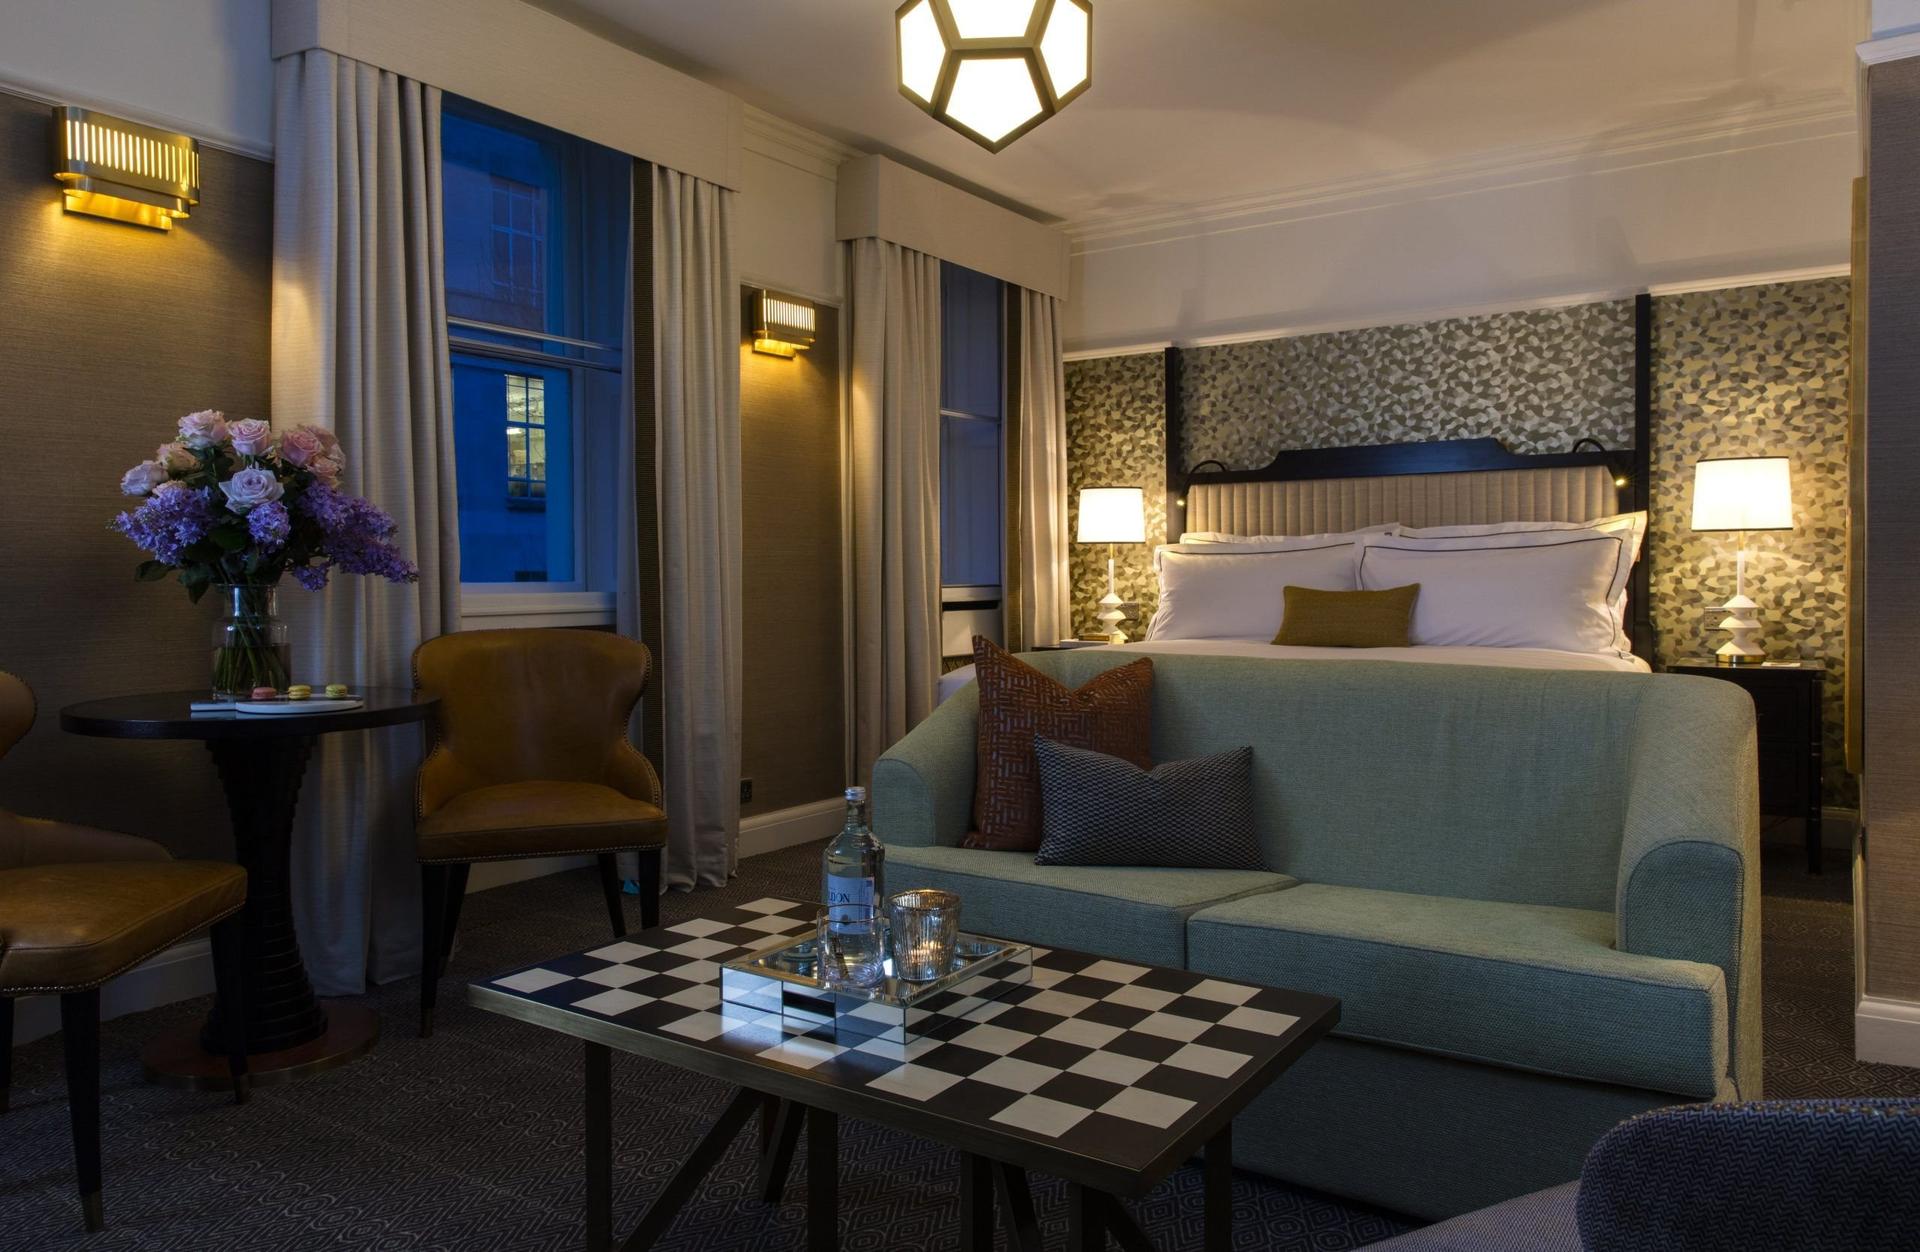 21 Most Romantic Hotels In London For 2021 Uk 